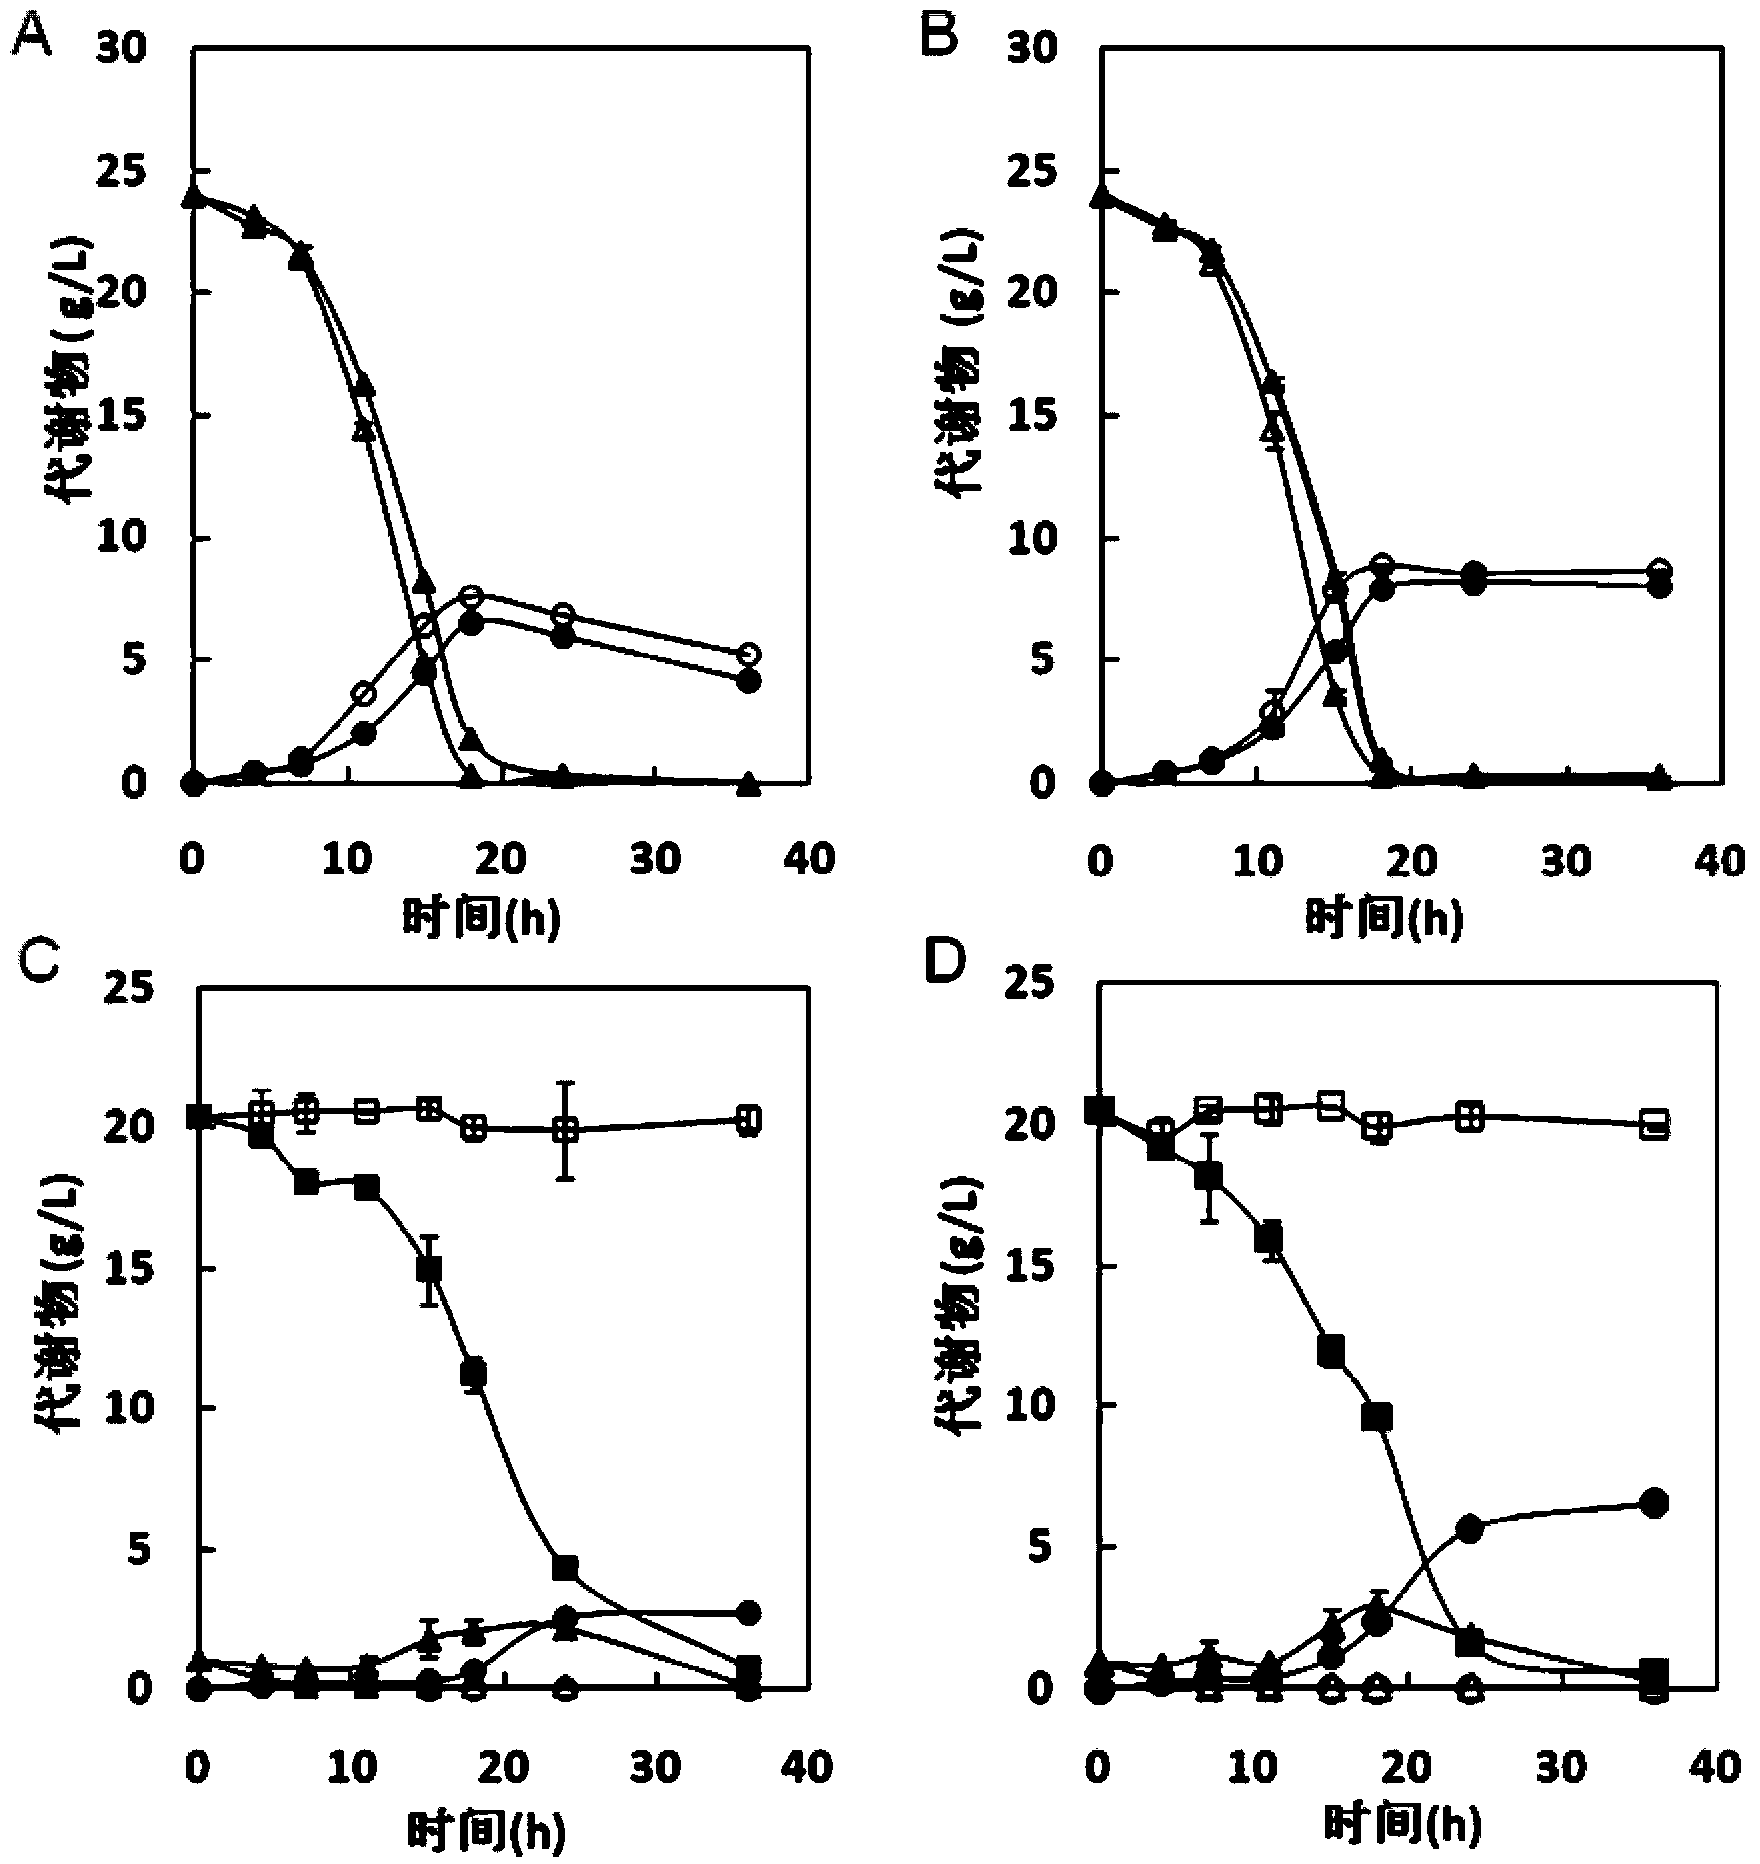 Recombinant saccharomyces cerevisiae strain for continuously and efficiently secreting beta-glucosidase and applications thereof